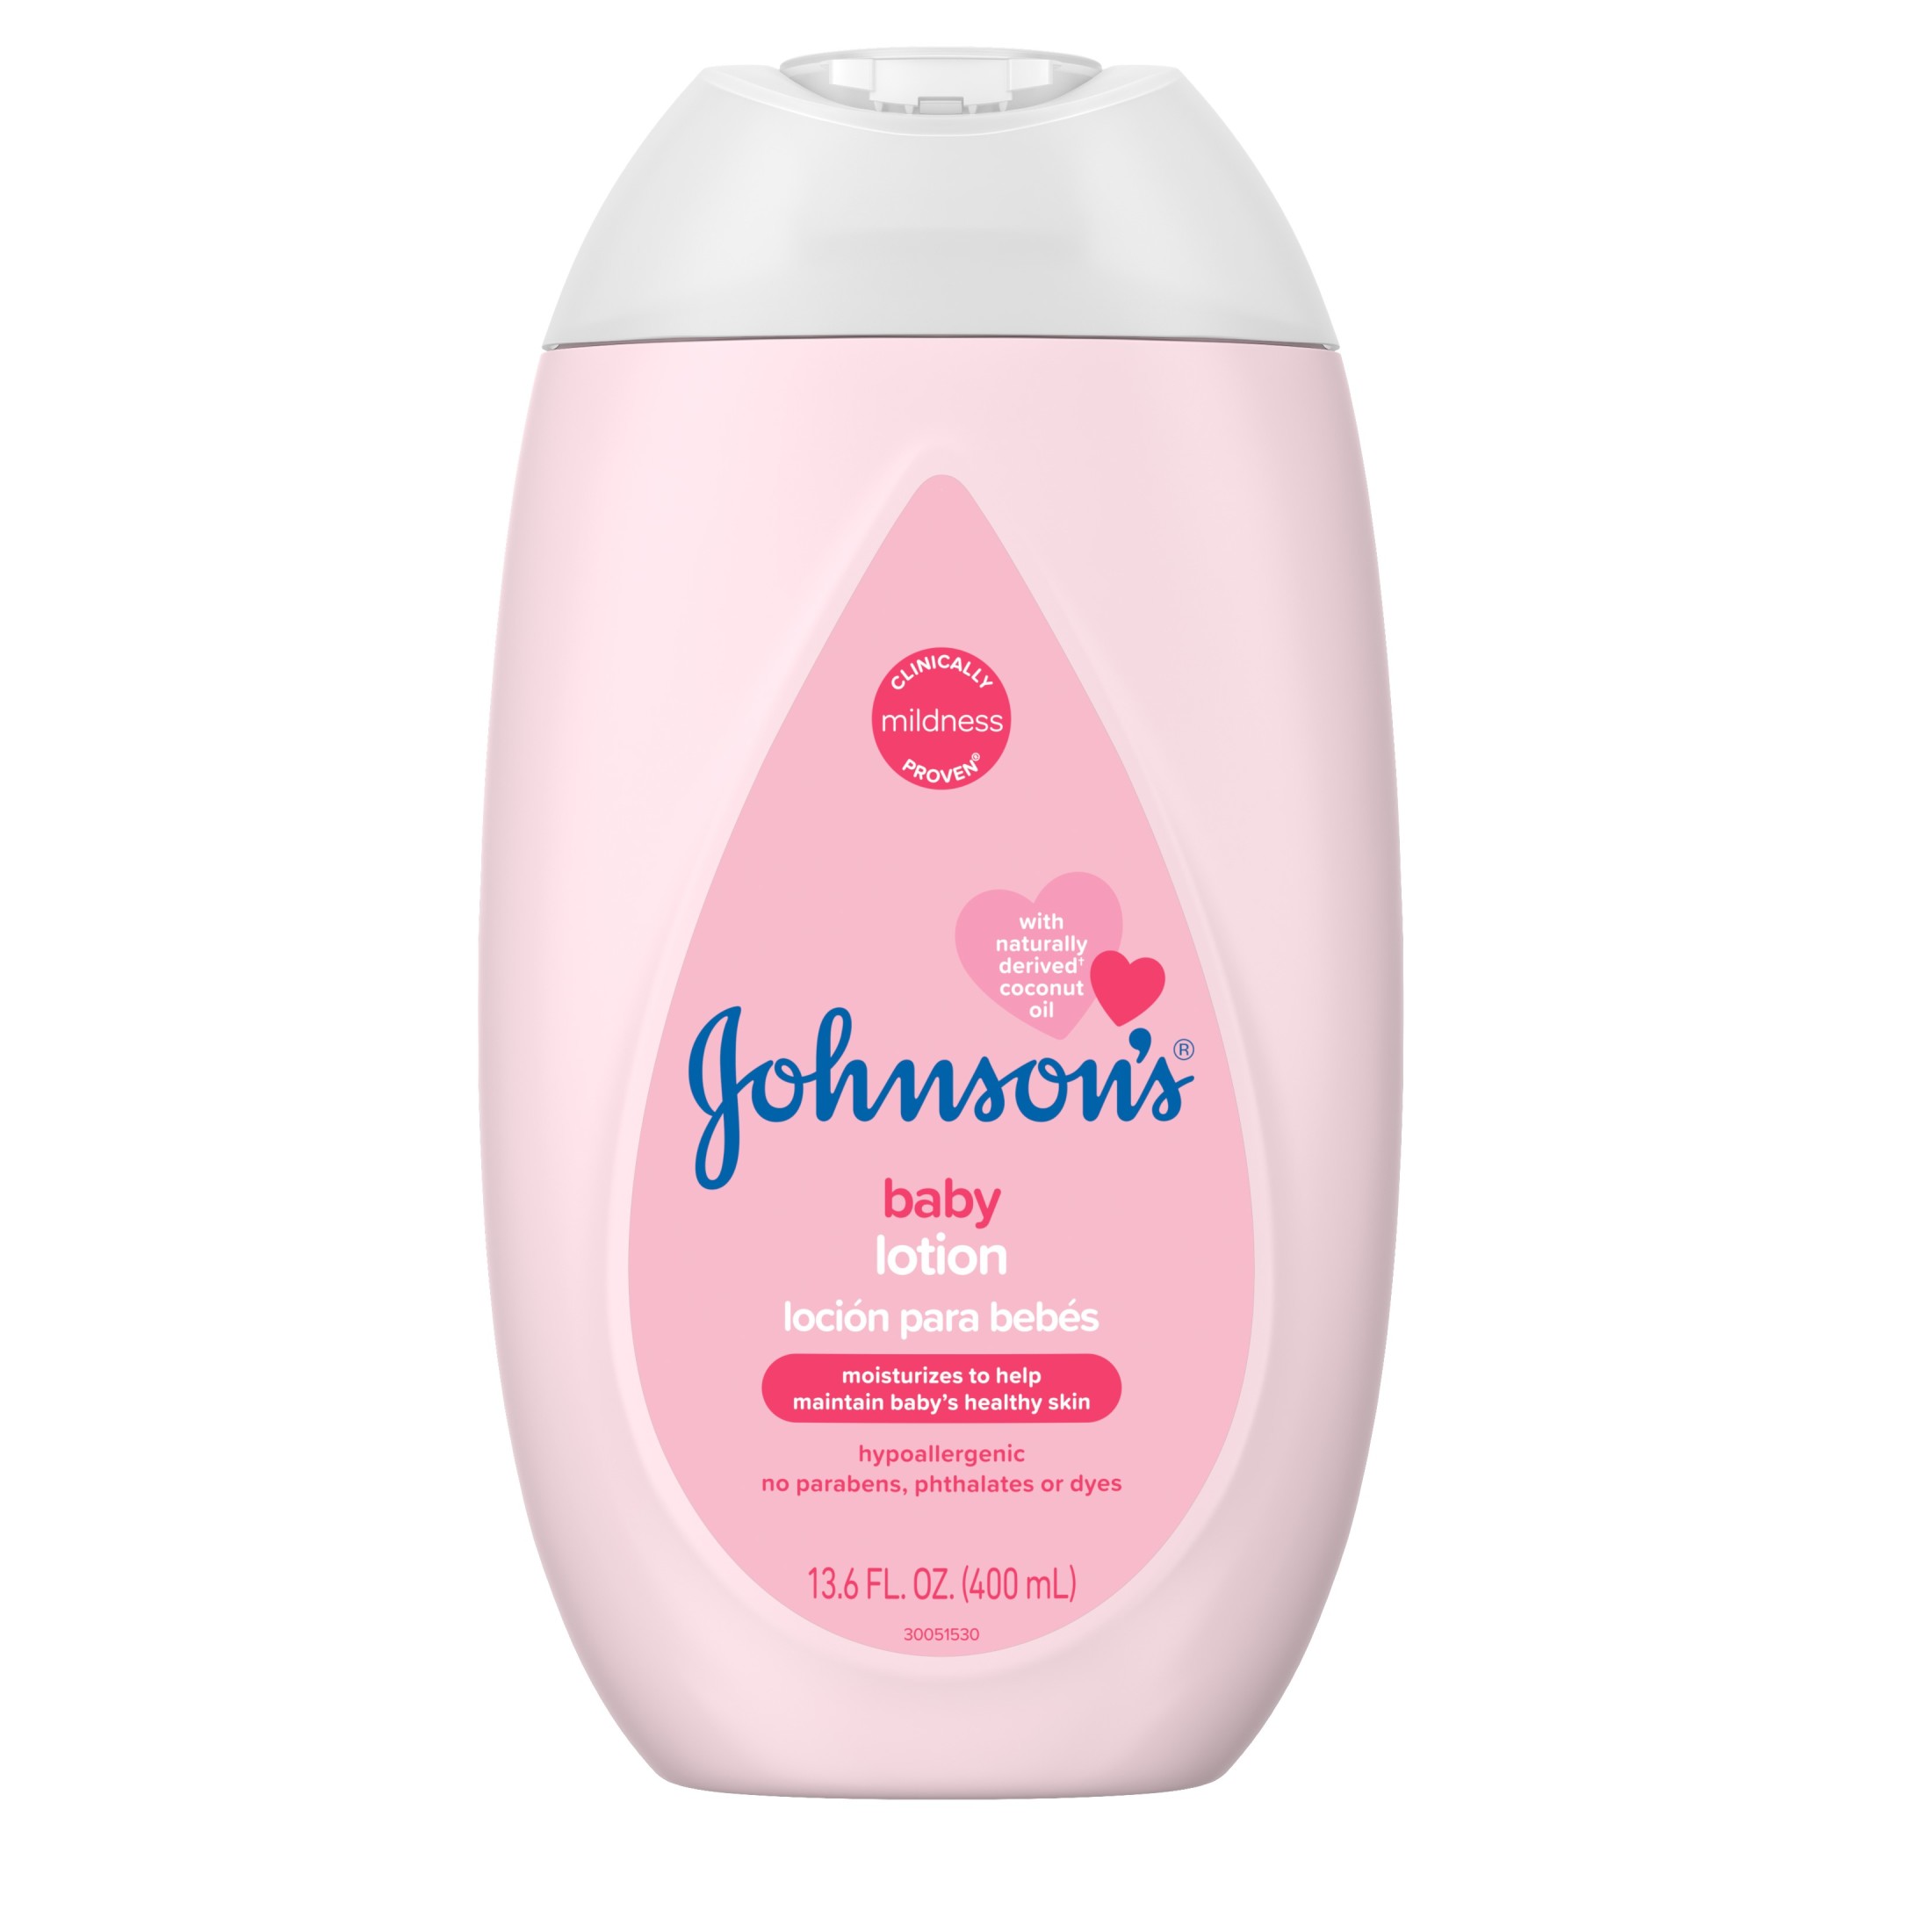 Johnson's Moisturizing Pink Baby Lotion with Coconut Oil, 13.6 fl. oz - image 2 of 3